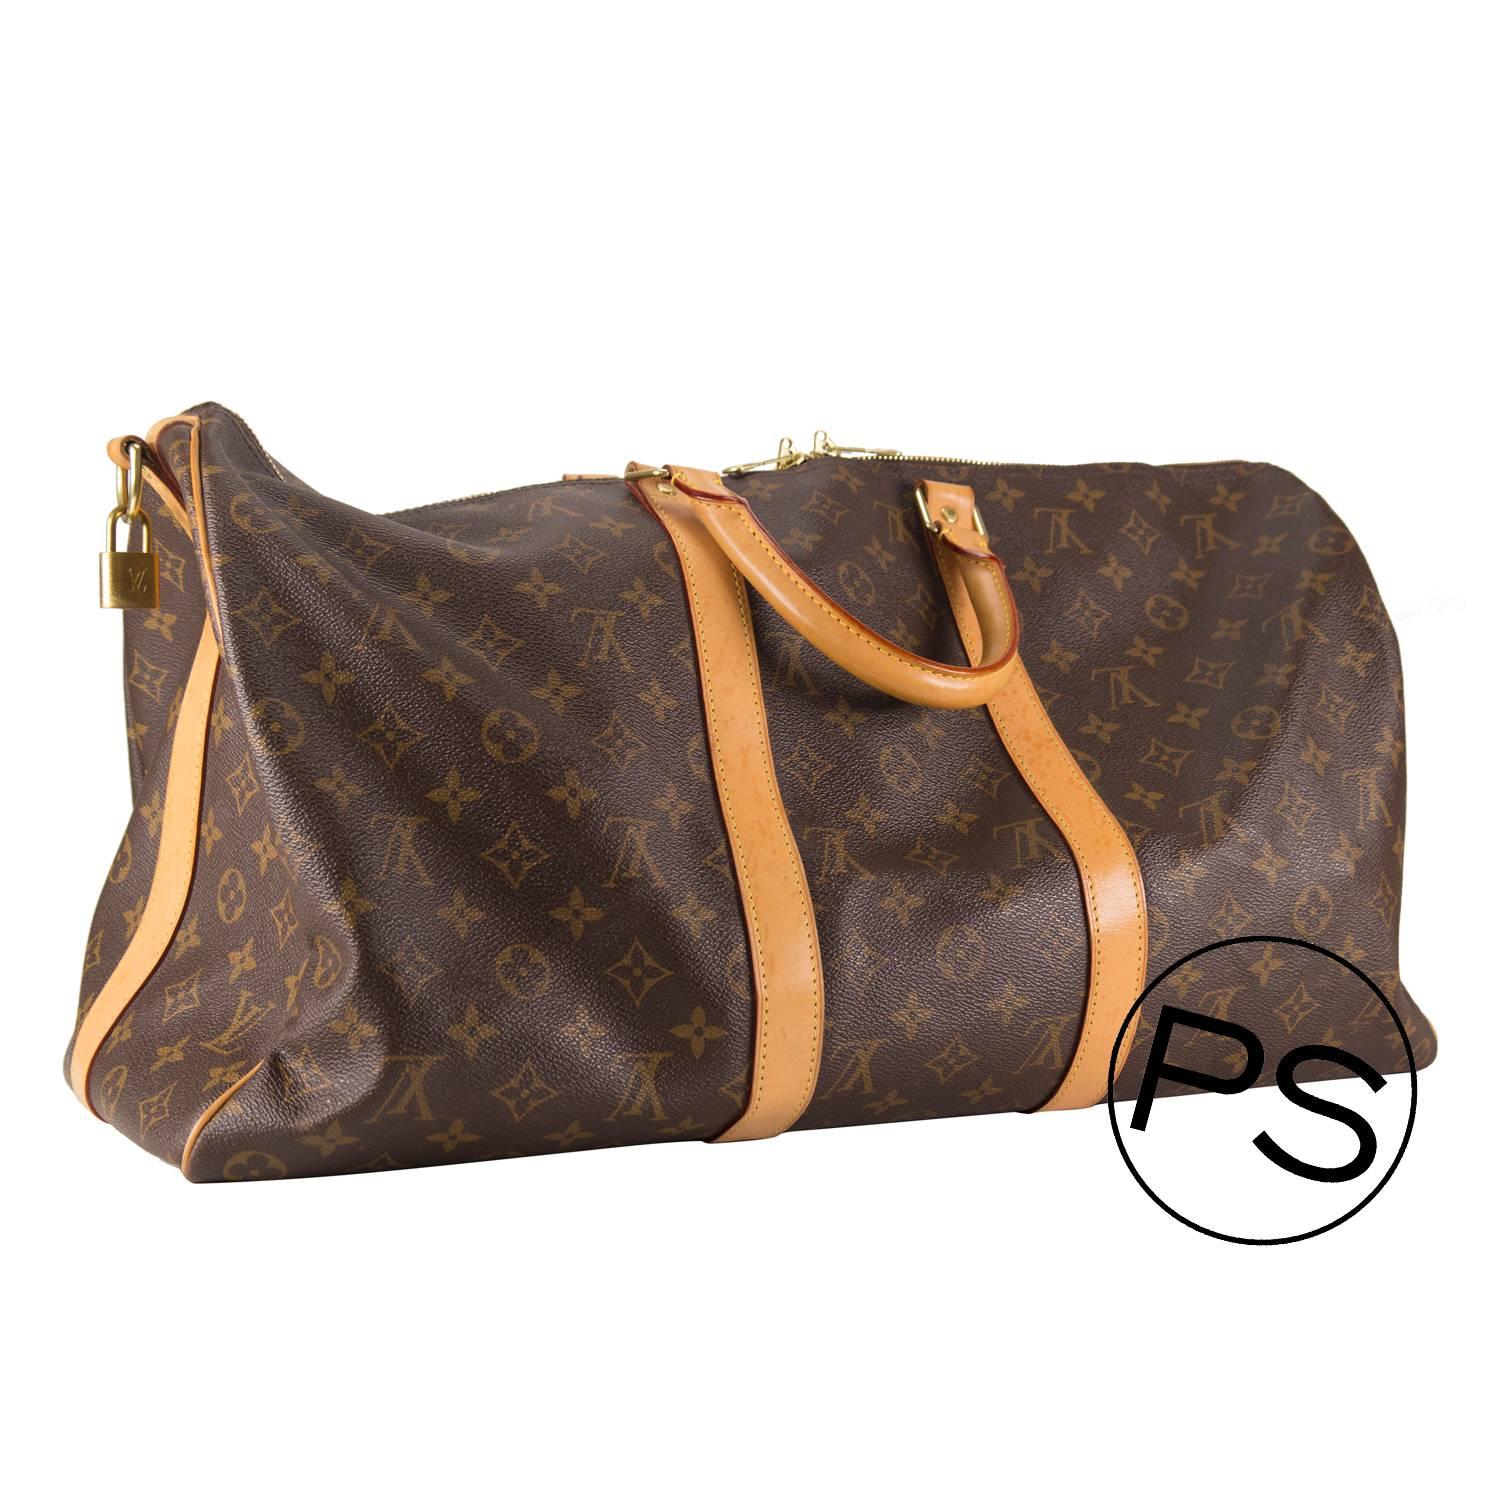 Louis Vuitton Handbag Keepall 45 Brown 2013

Pre-owned and used.

Bought it in Louis Vuitton store in 2013.

Composition; Leather

Model; Keepall 45

Color; Brown

*Protective felt removed for purposes of photography only.
-Shipment and